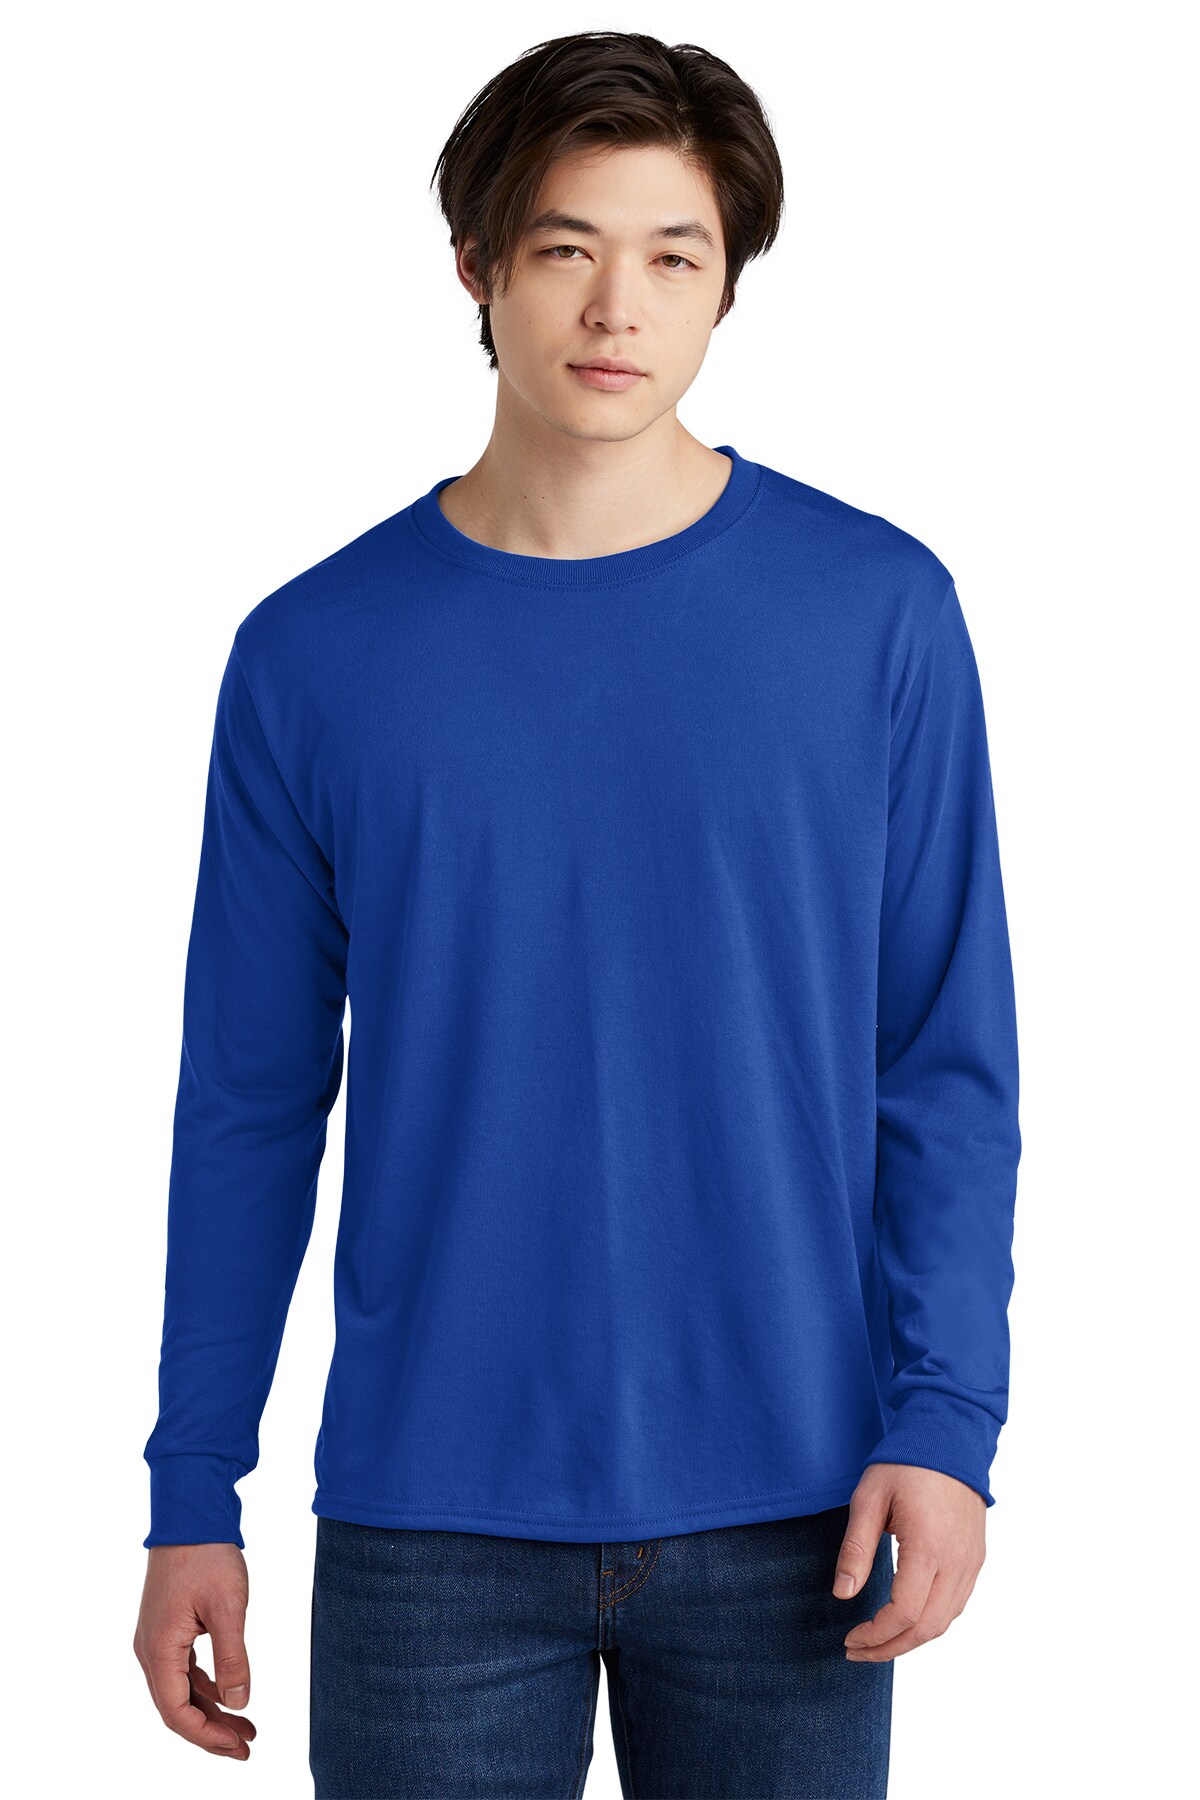 Stylish Long Sleeve T-Shirts Stretch Crewneck Soft Tees for Men | Men's  Eversoft 5.3-oz, 100% polyester Cotton Stay Tucked Crew Long Sleeve T-Shirt